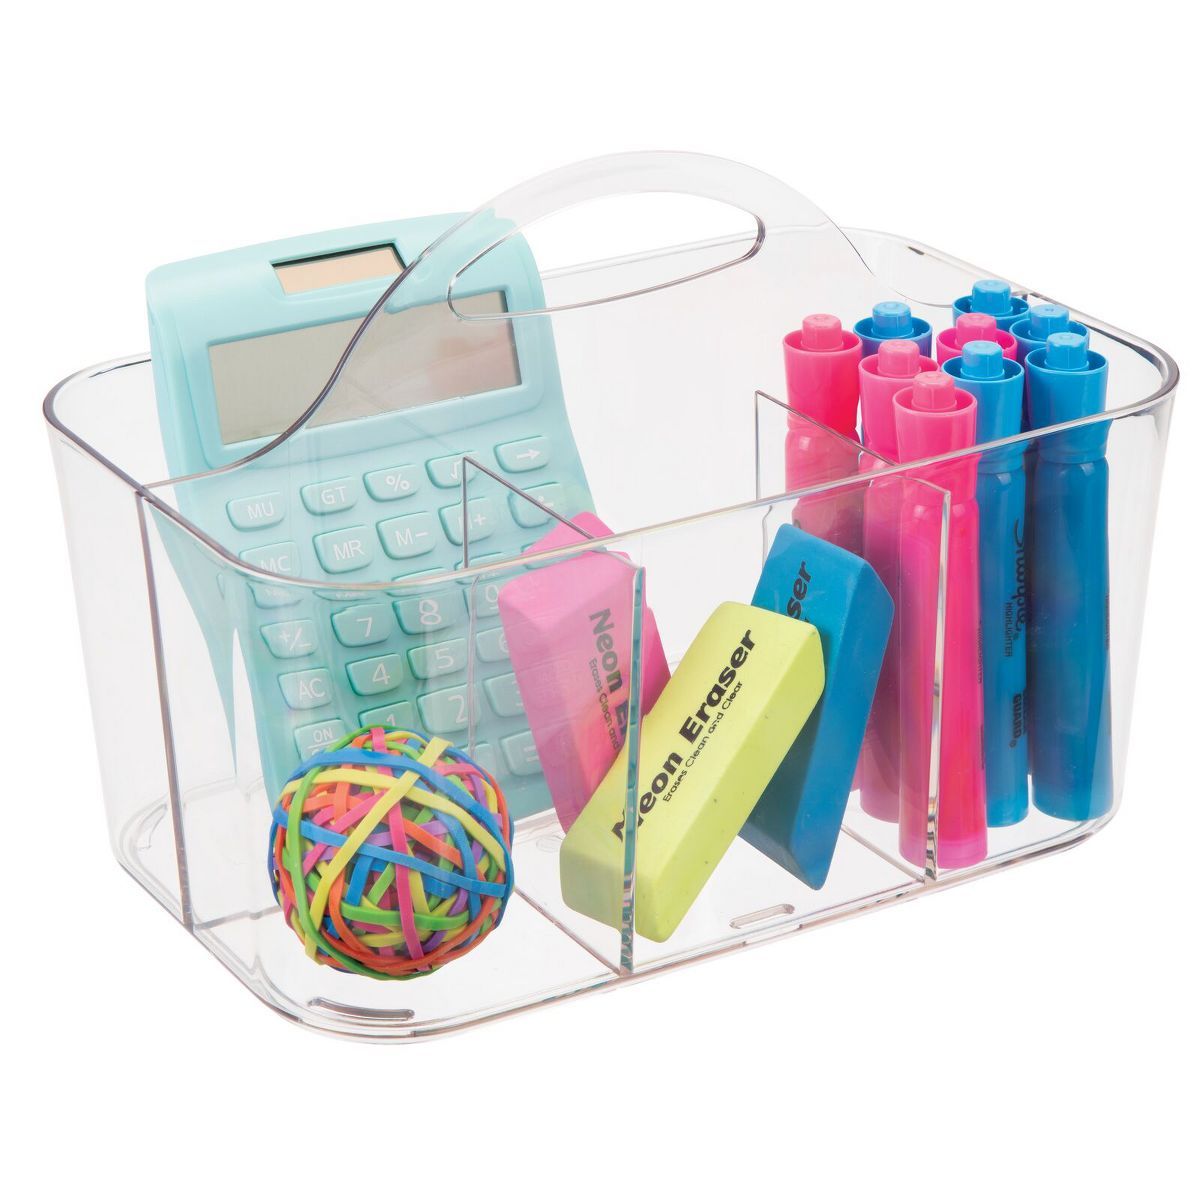 mDesign Plastic Storage Caddy Tote for Desktop Office Supplies, Small | Target